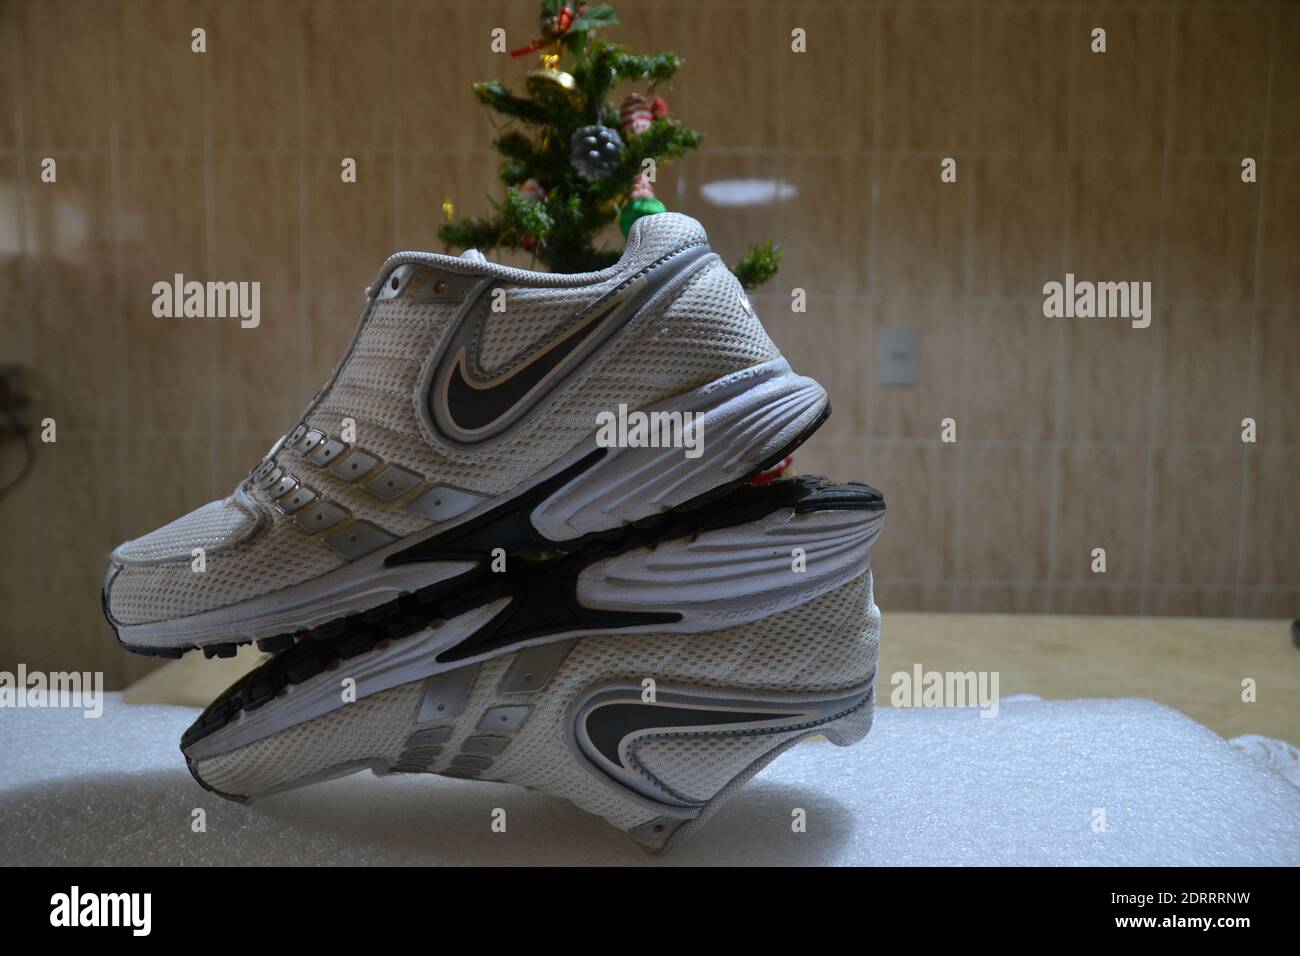 Women's running shoes on white background with Christmas tree in the background Stock Photo